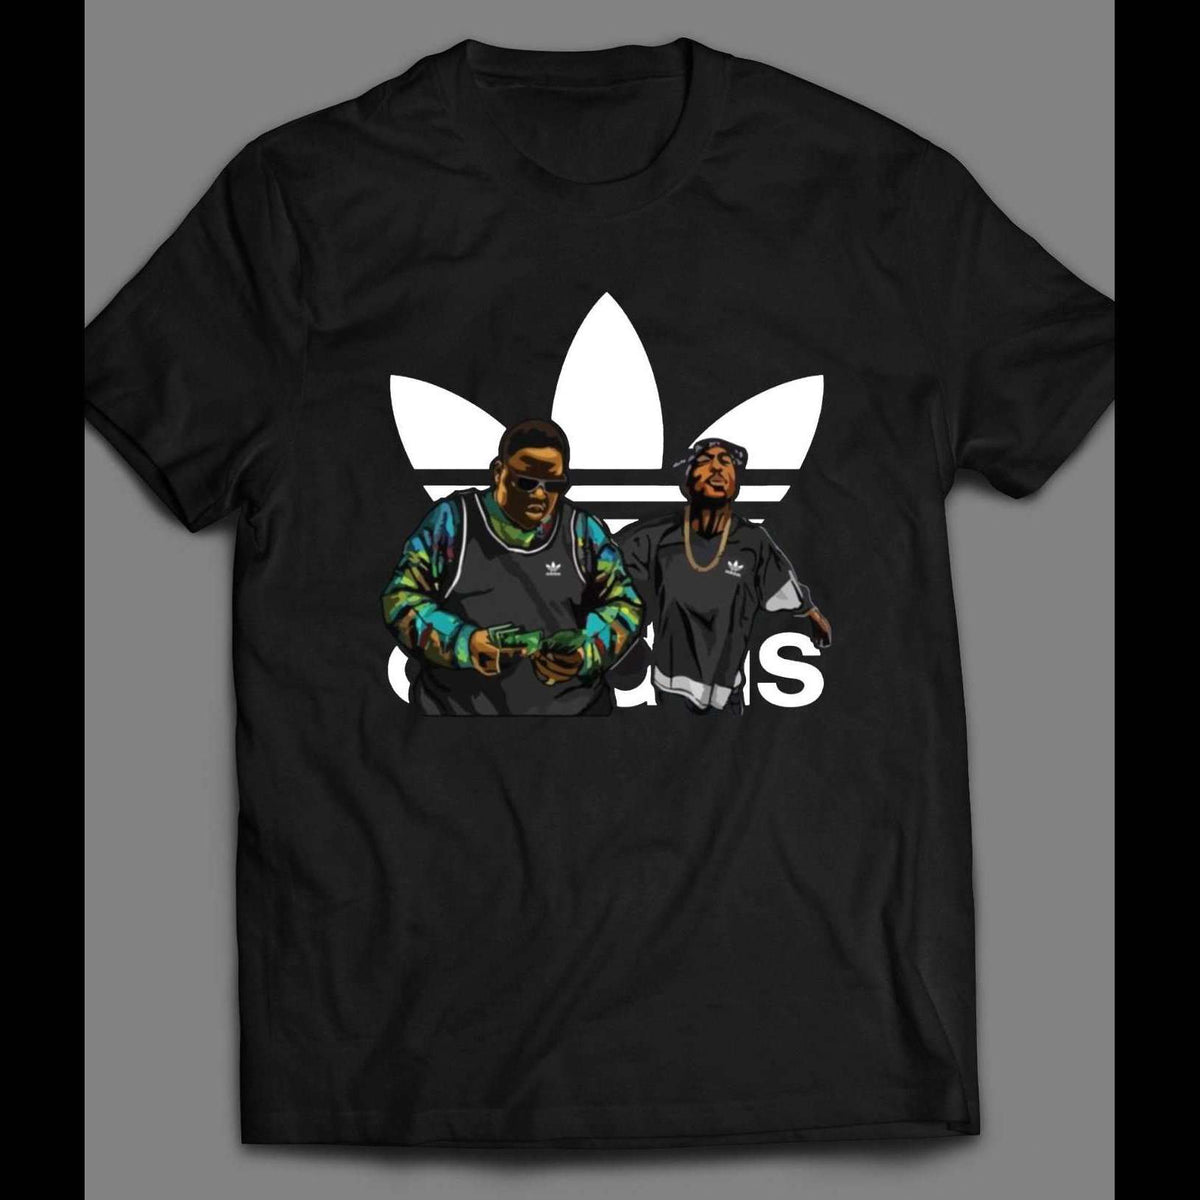 RAPPERS TUPAC AND BIGGIE SMALLS SPORTS WEAR PARODY MASH UP T-SHIRT1200 x 1200